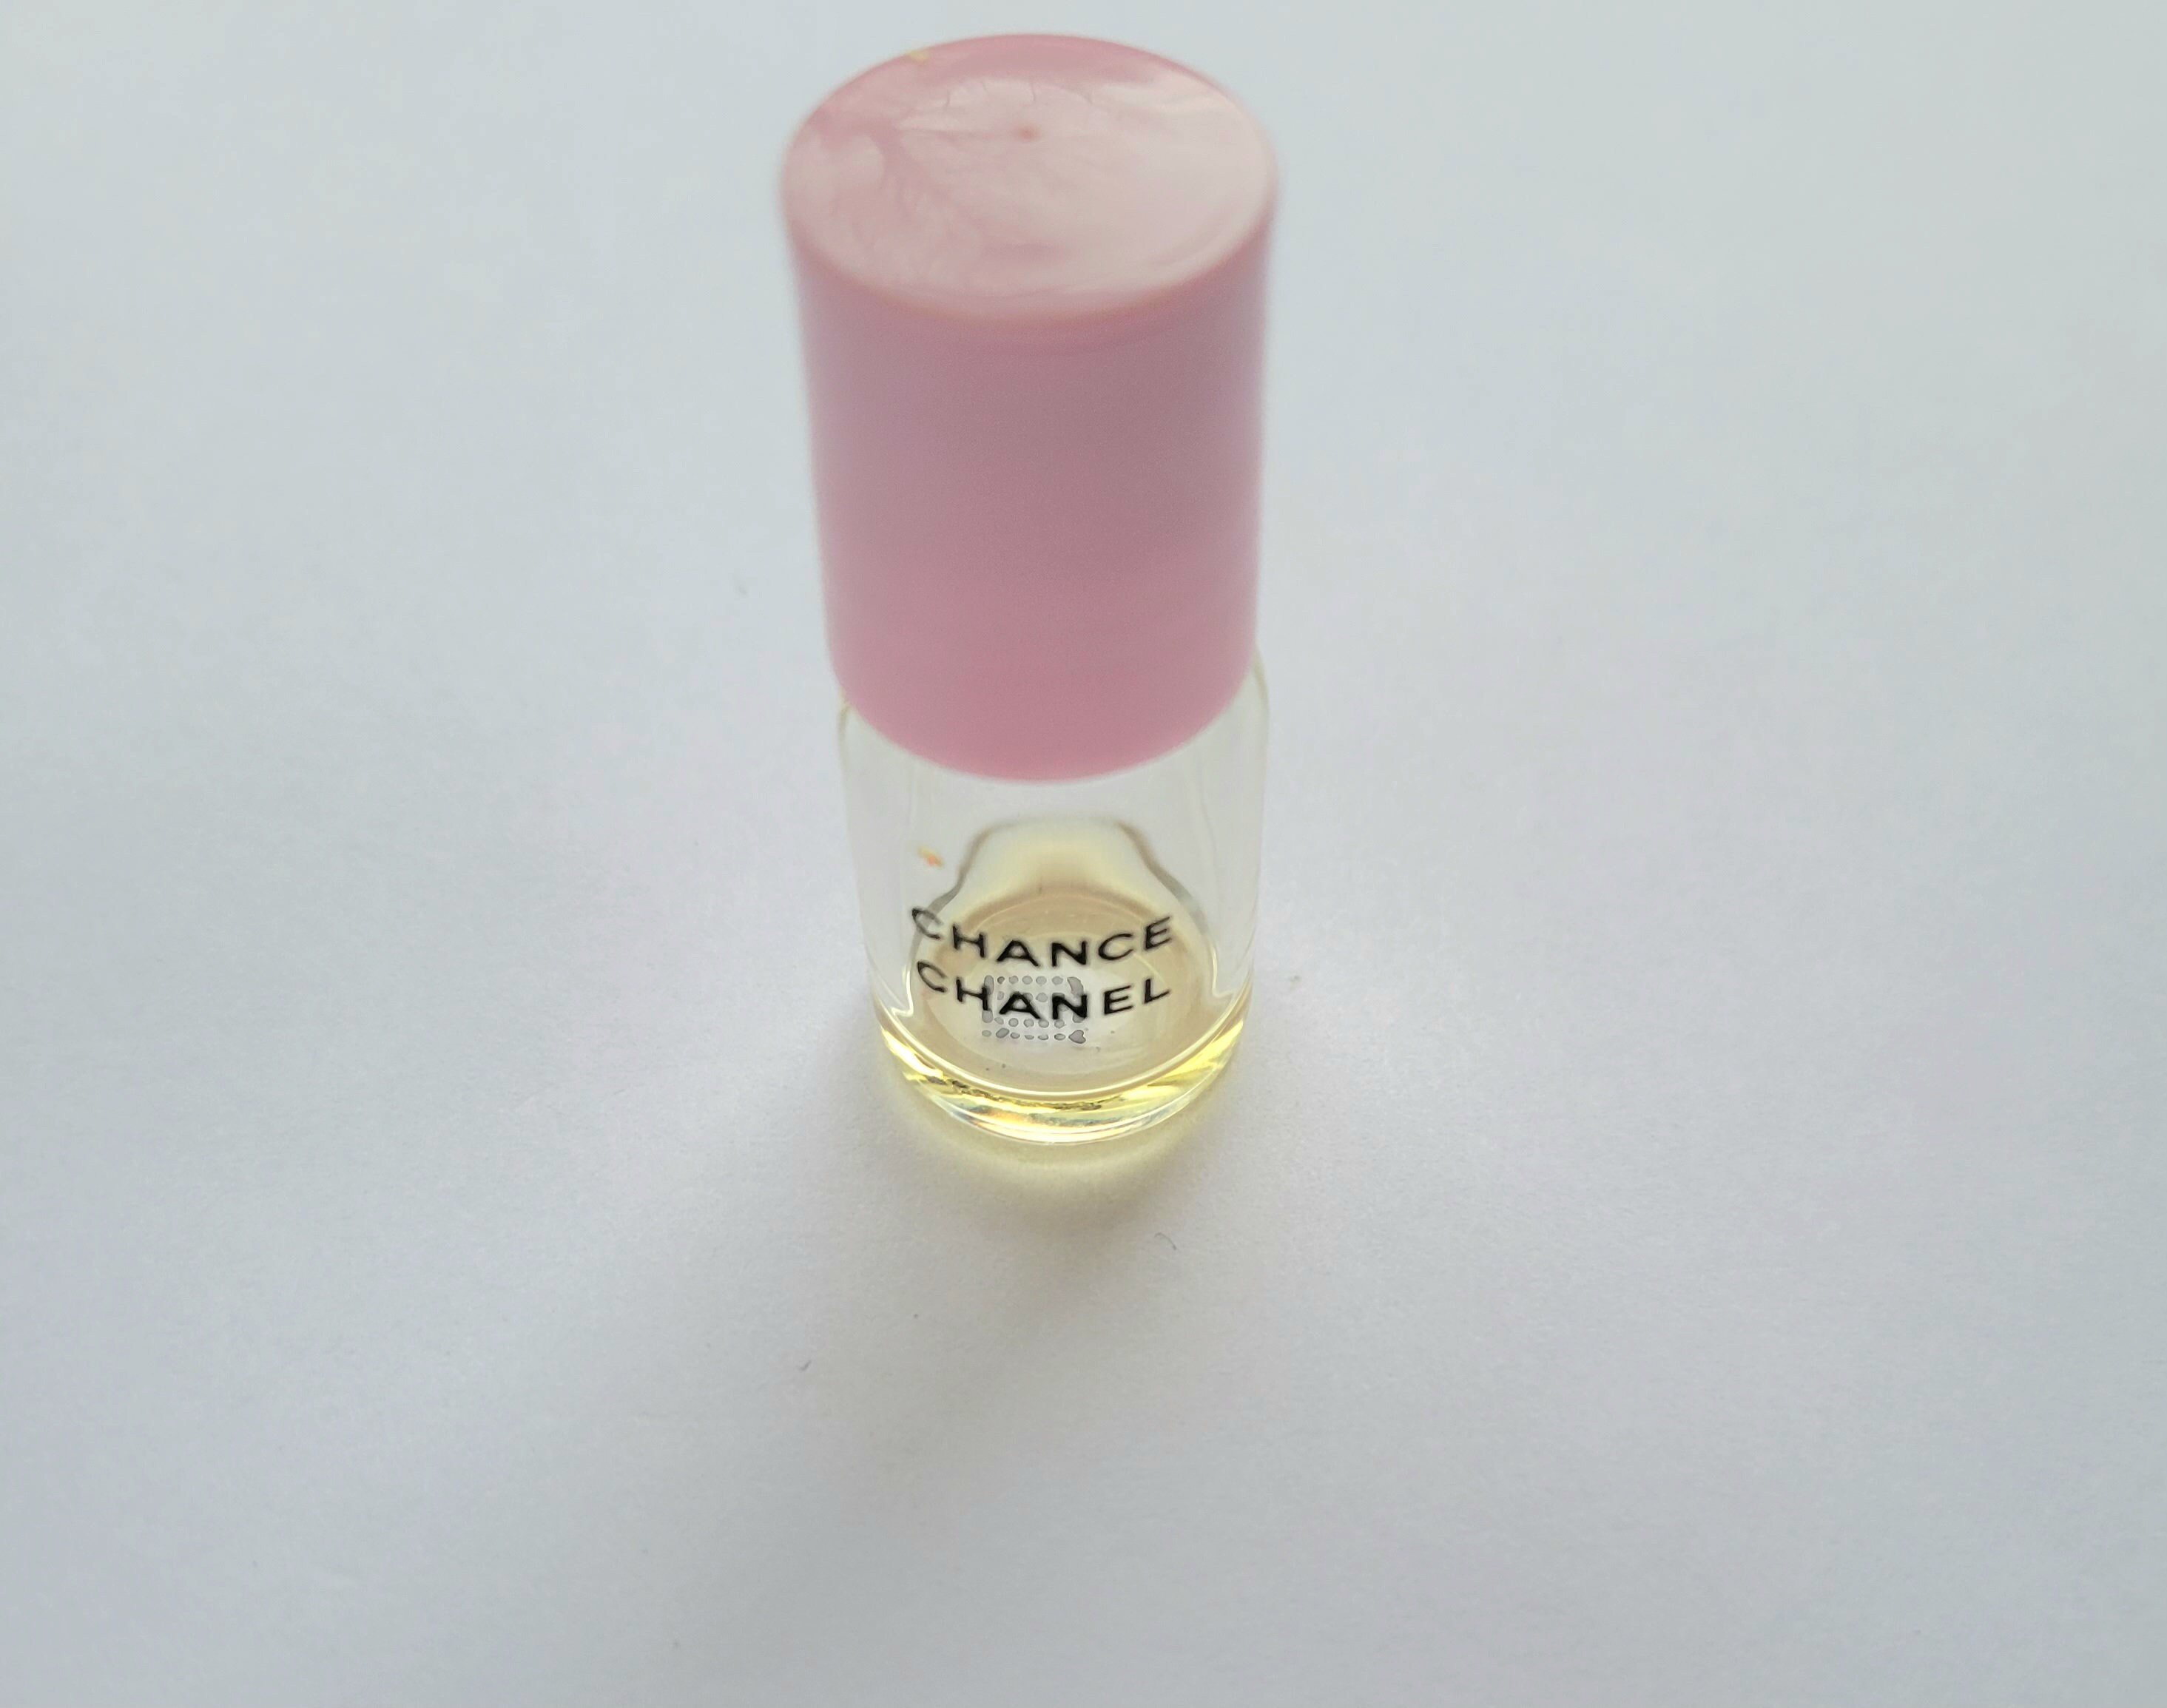 Vintage Chanel Chance Perfume Mini Roll On Travel Size 